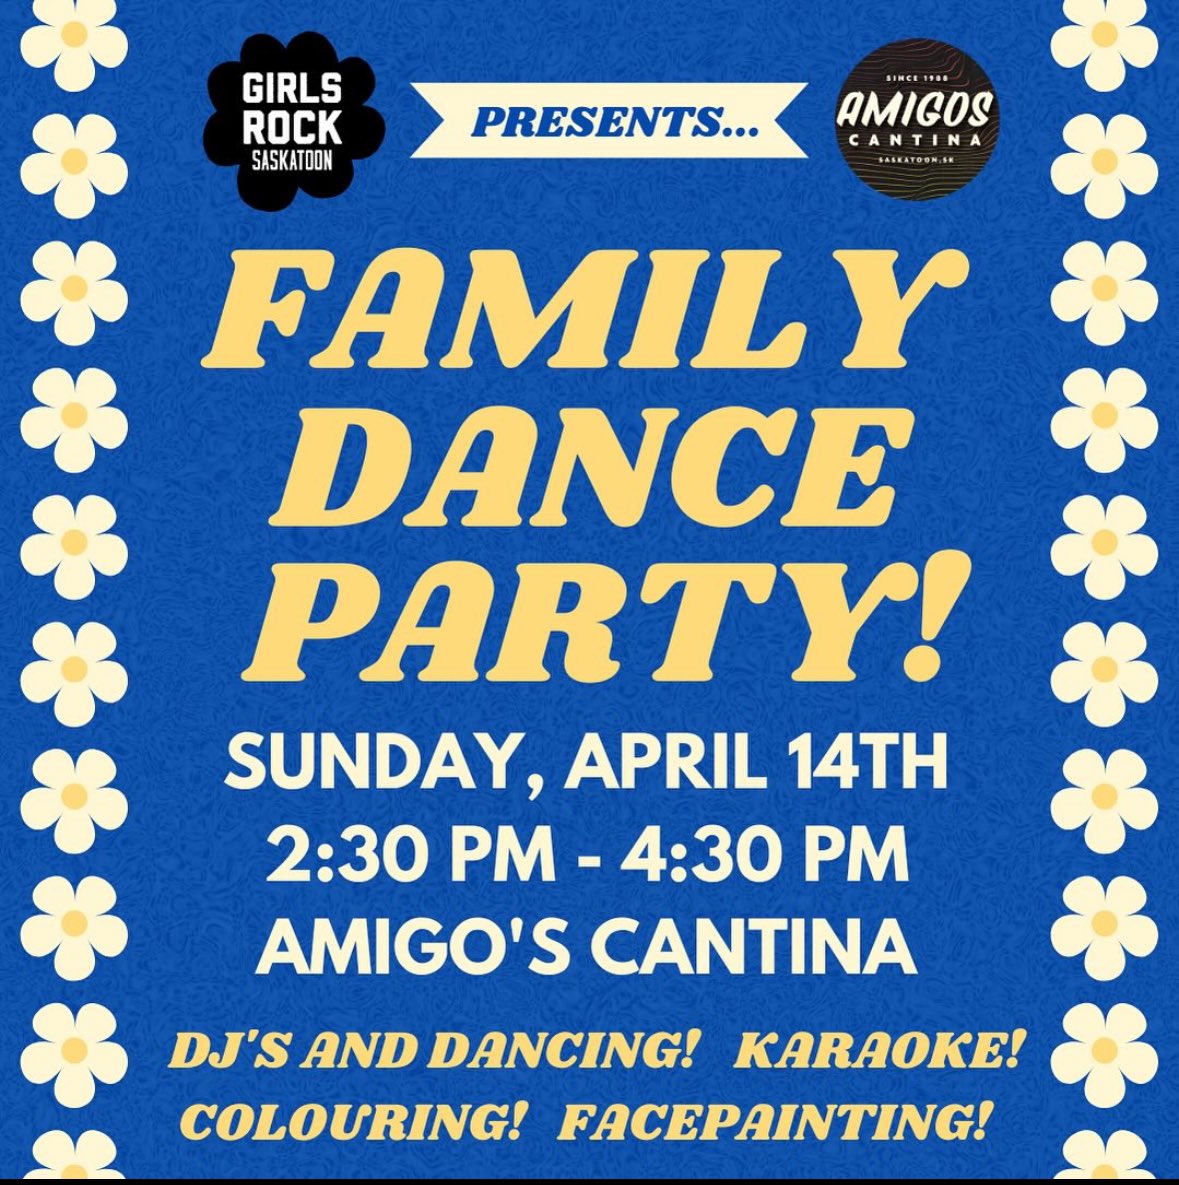 Girls Rock Saskatoon presents a FAMILY DANCE PARTY! Today from 2:30pm - 4:30pm Entry by donation A ton of fun for all humans of all ages! A stellar Dj, an excited dance floor, a craft table and Face Painting by donation! facebook.com/events/9516650…